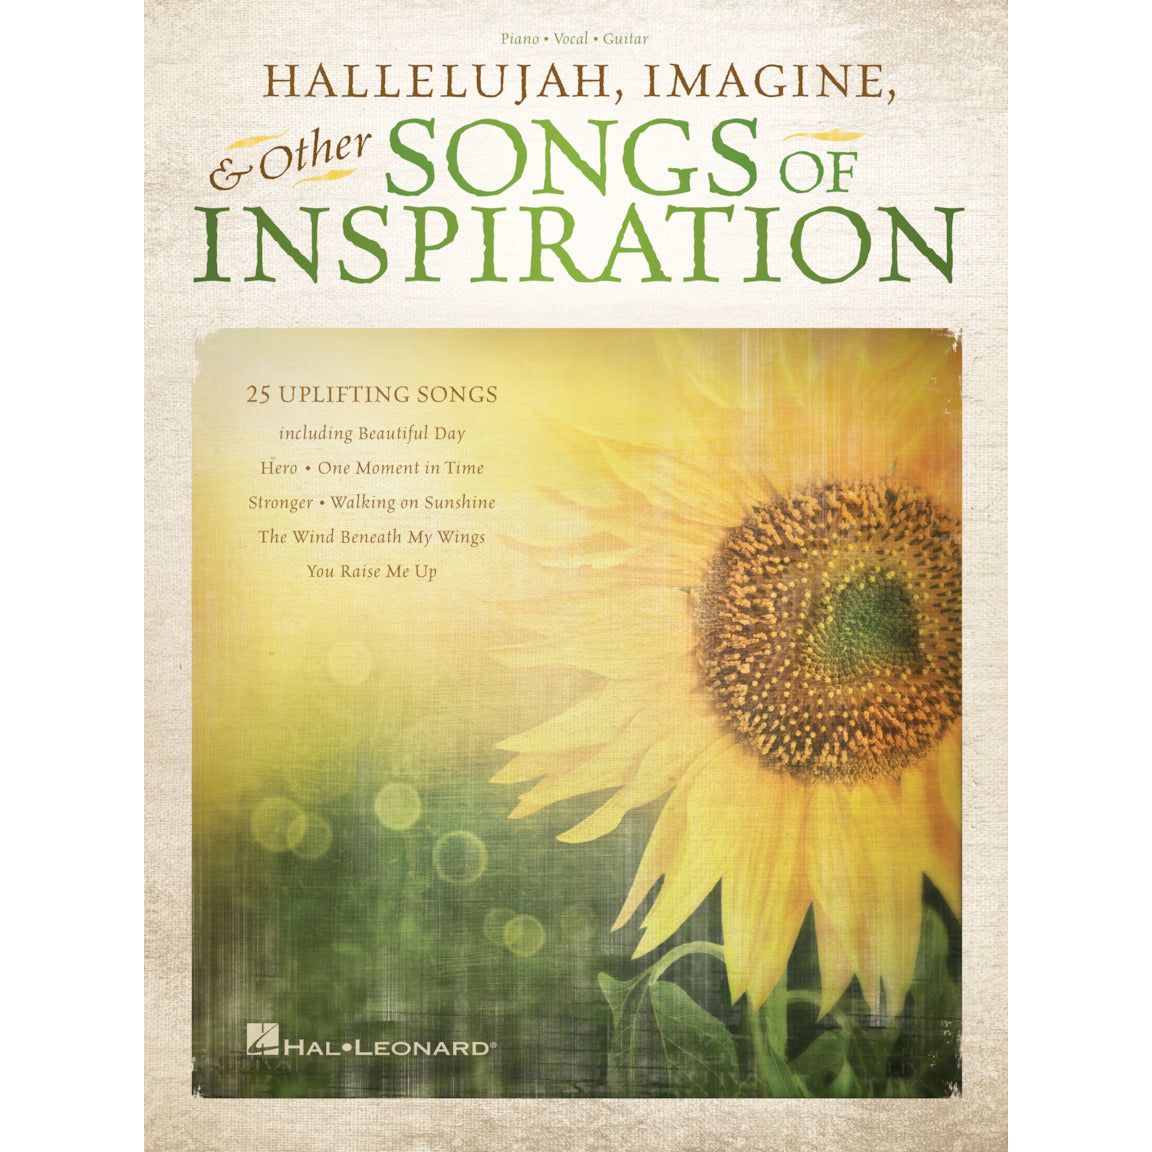 Hallelujah, Imagine & Other Songs of Inspiration - For Piano, Voice and Guitar